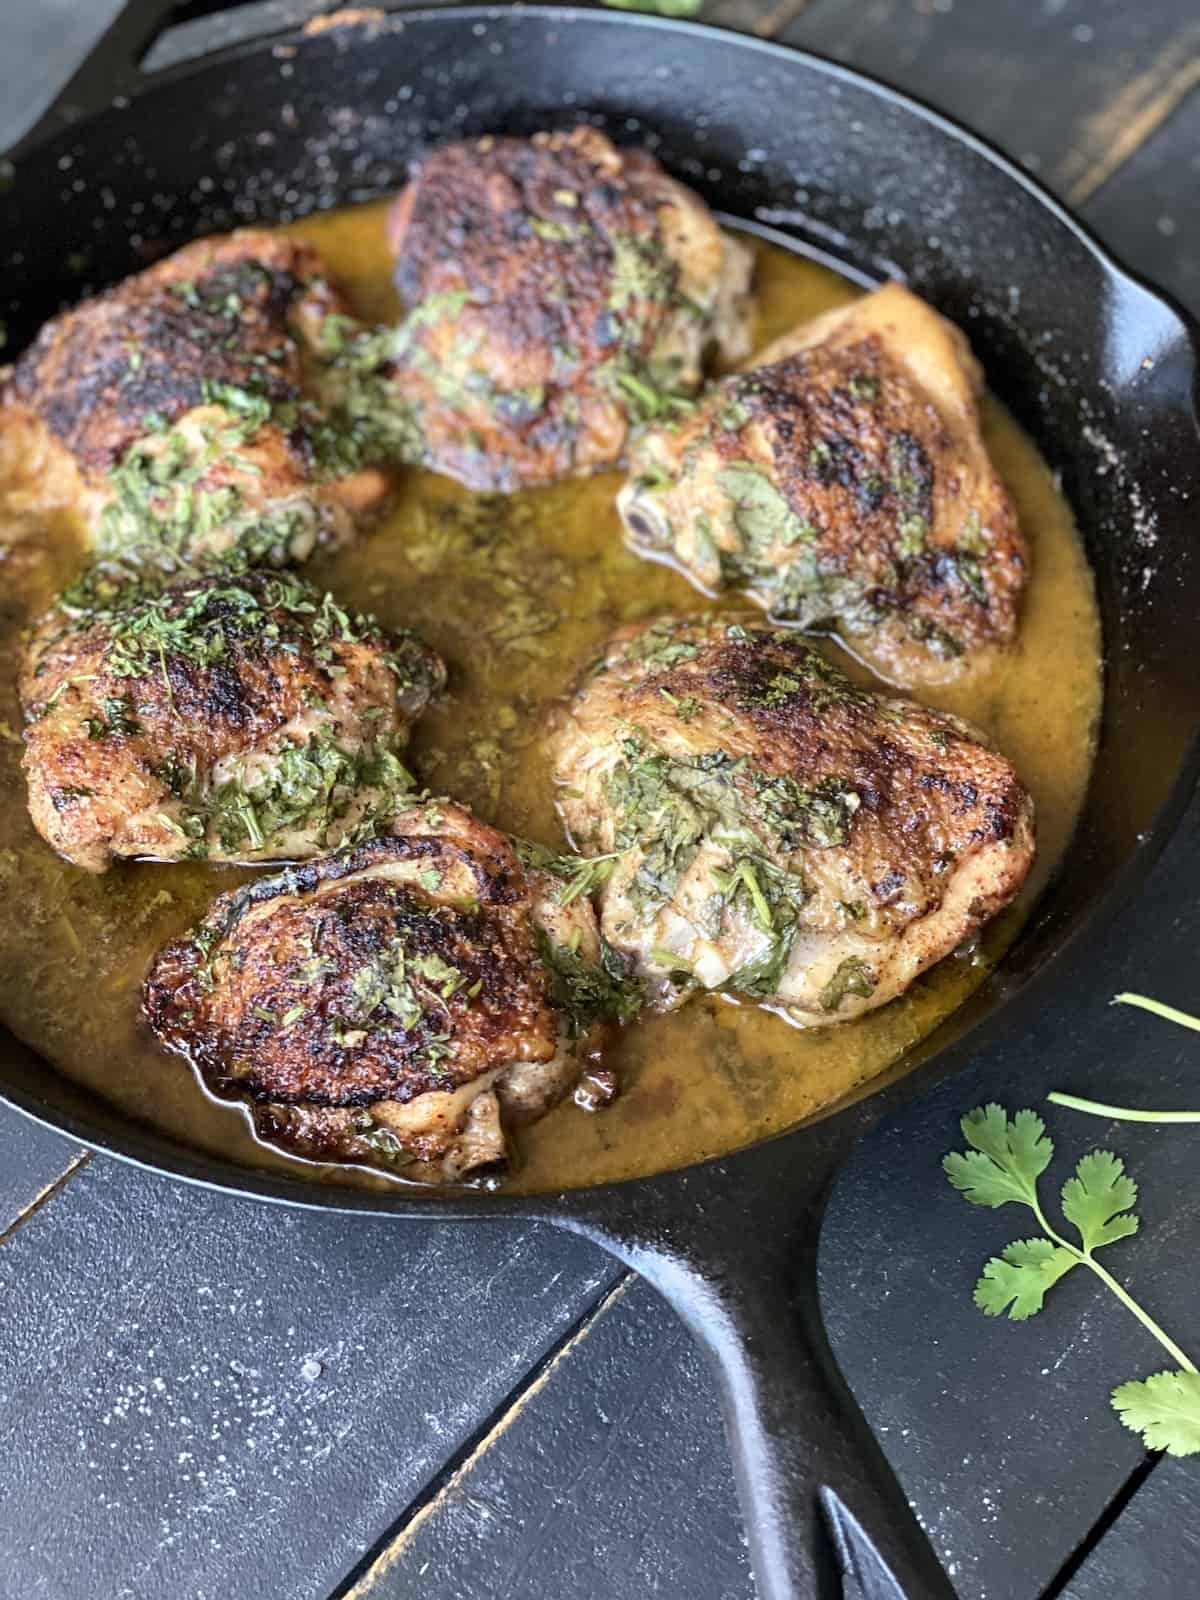 Chicken thighs cooked in a cast iron skillet on black table.